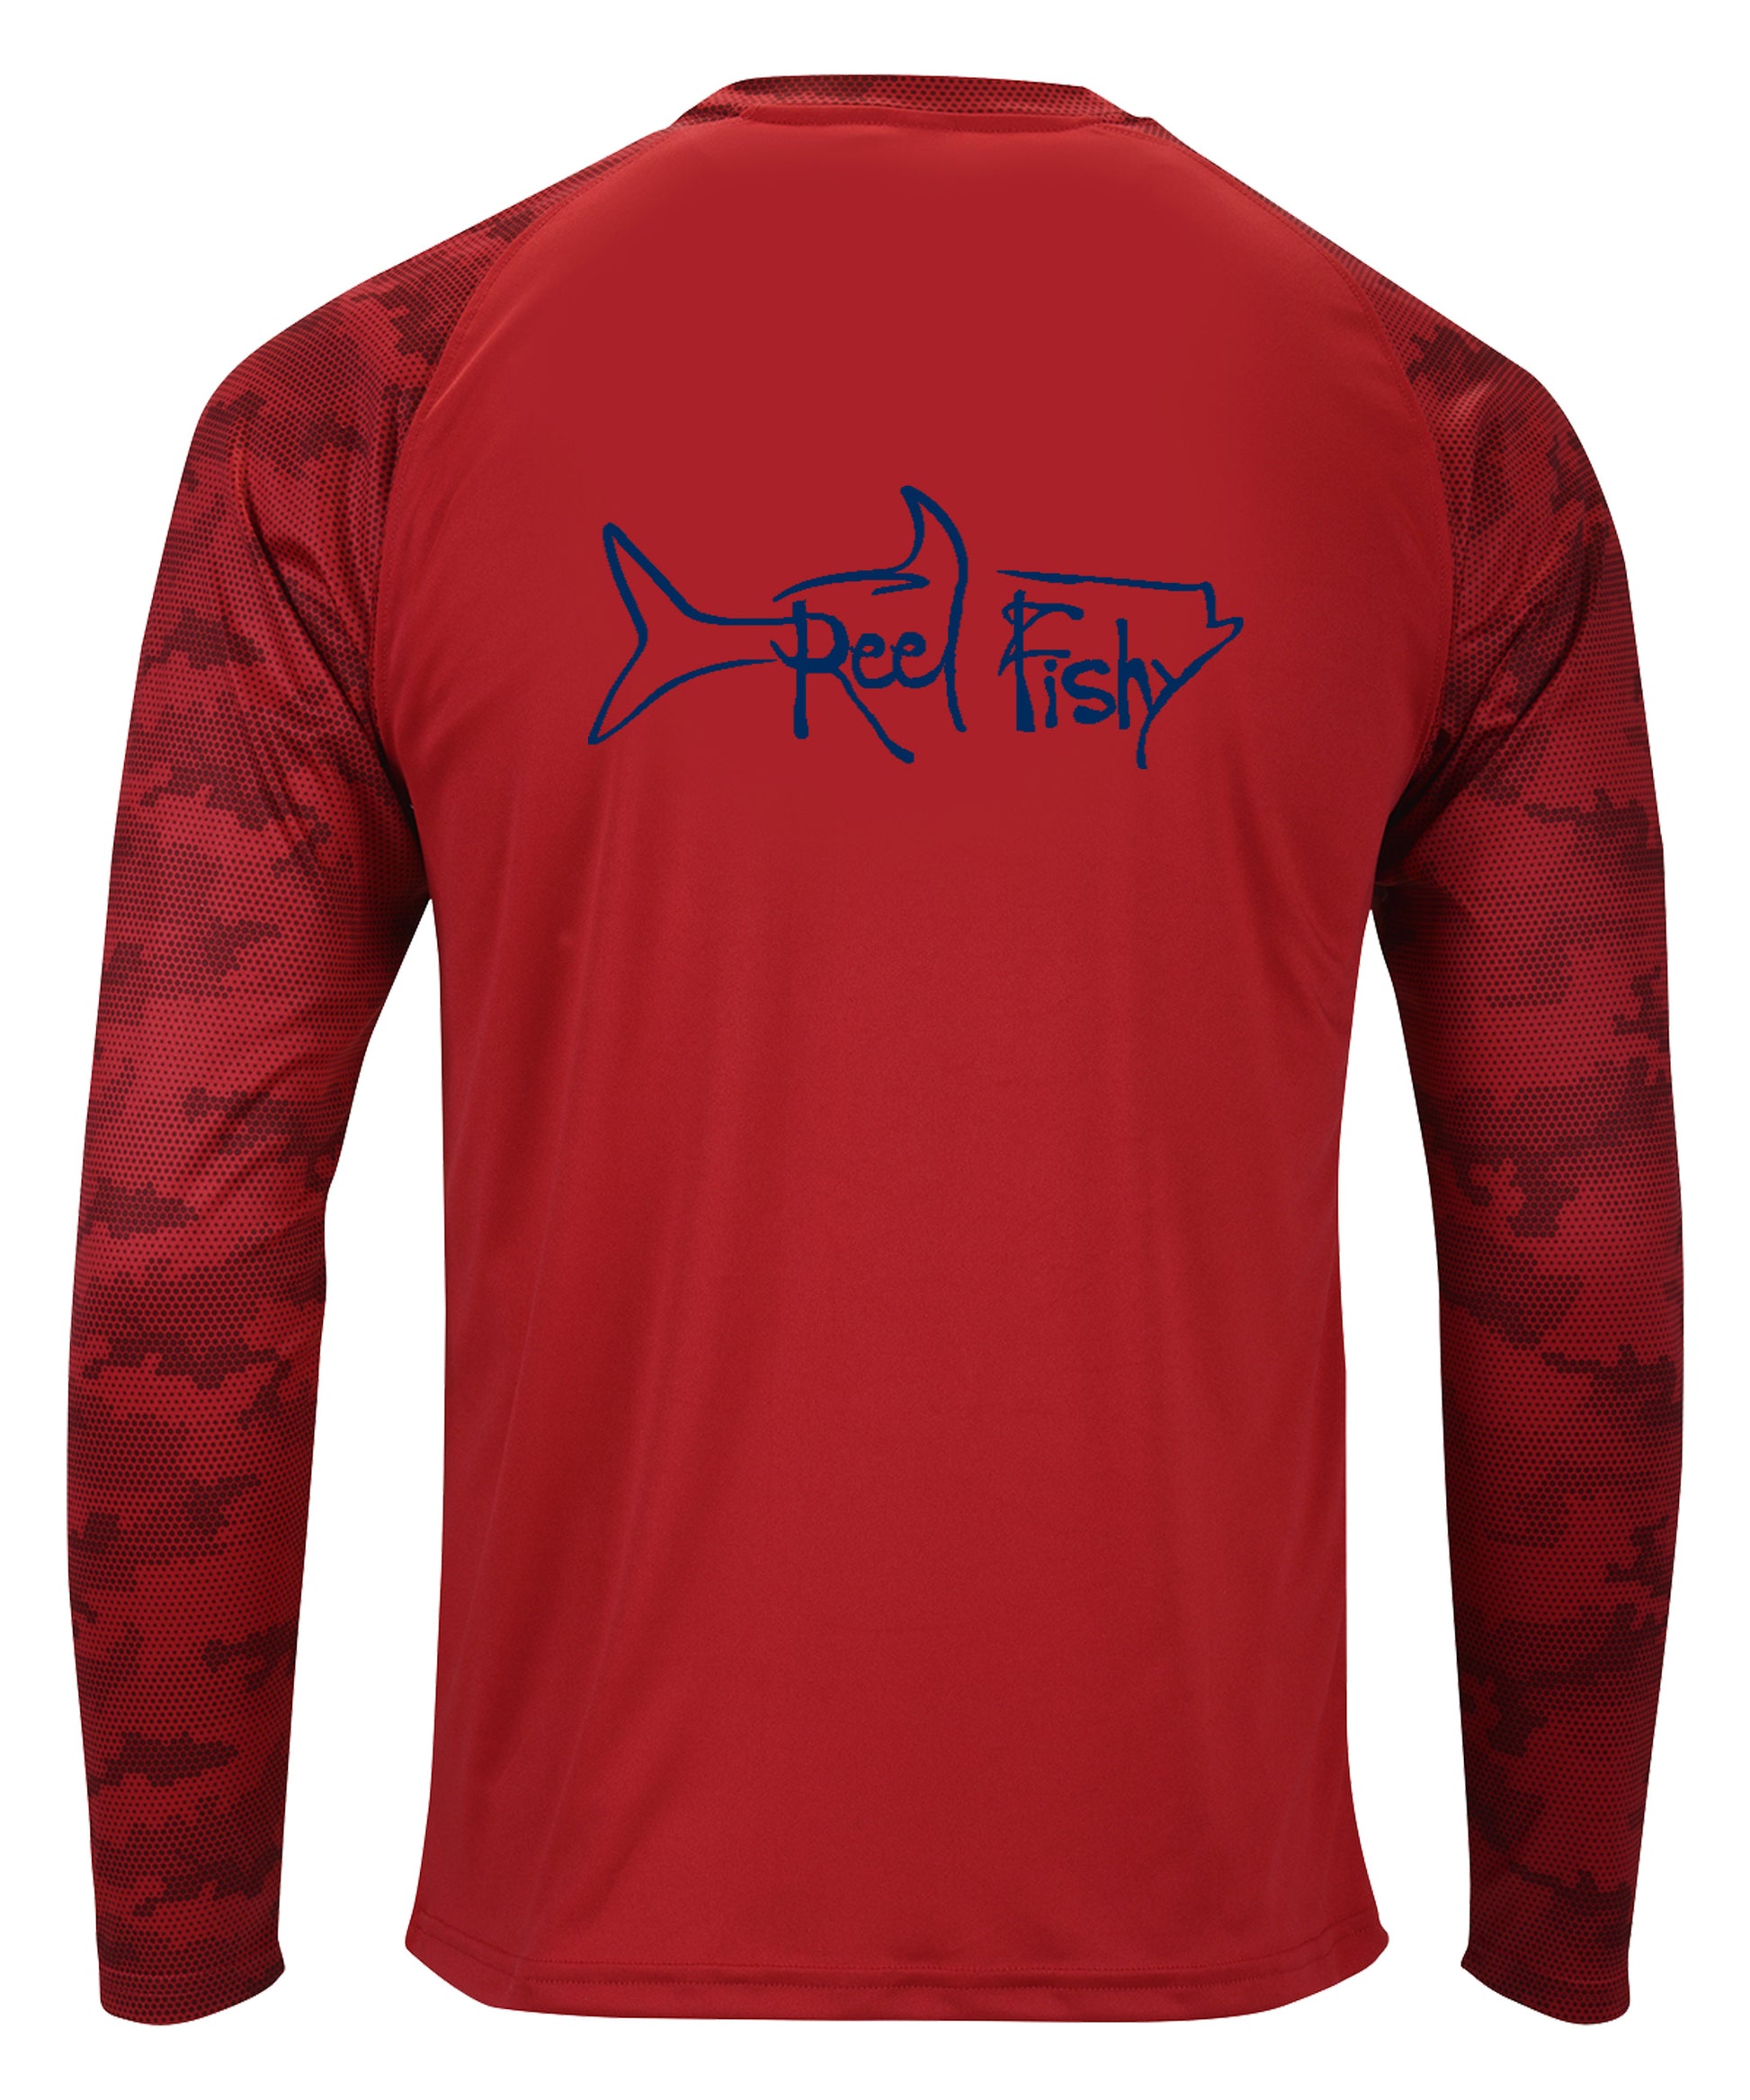 Tarpon Digital Camo Performance Dry-Fit Fishing Long Sleeve Shirts with 50+ UPF Sun Protection - Red